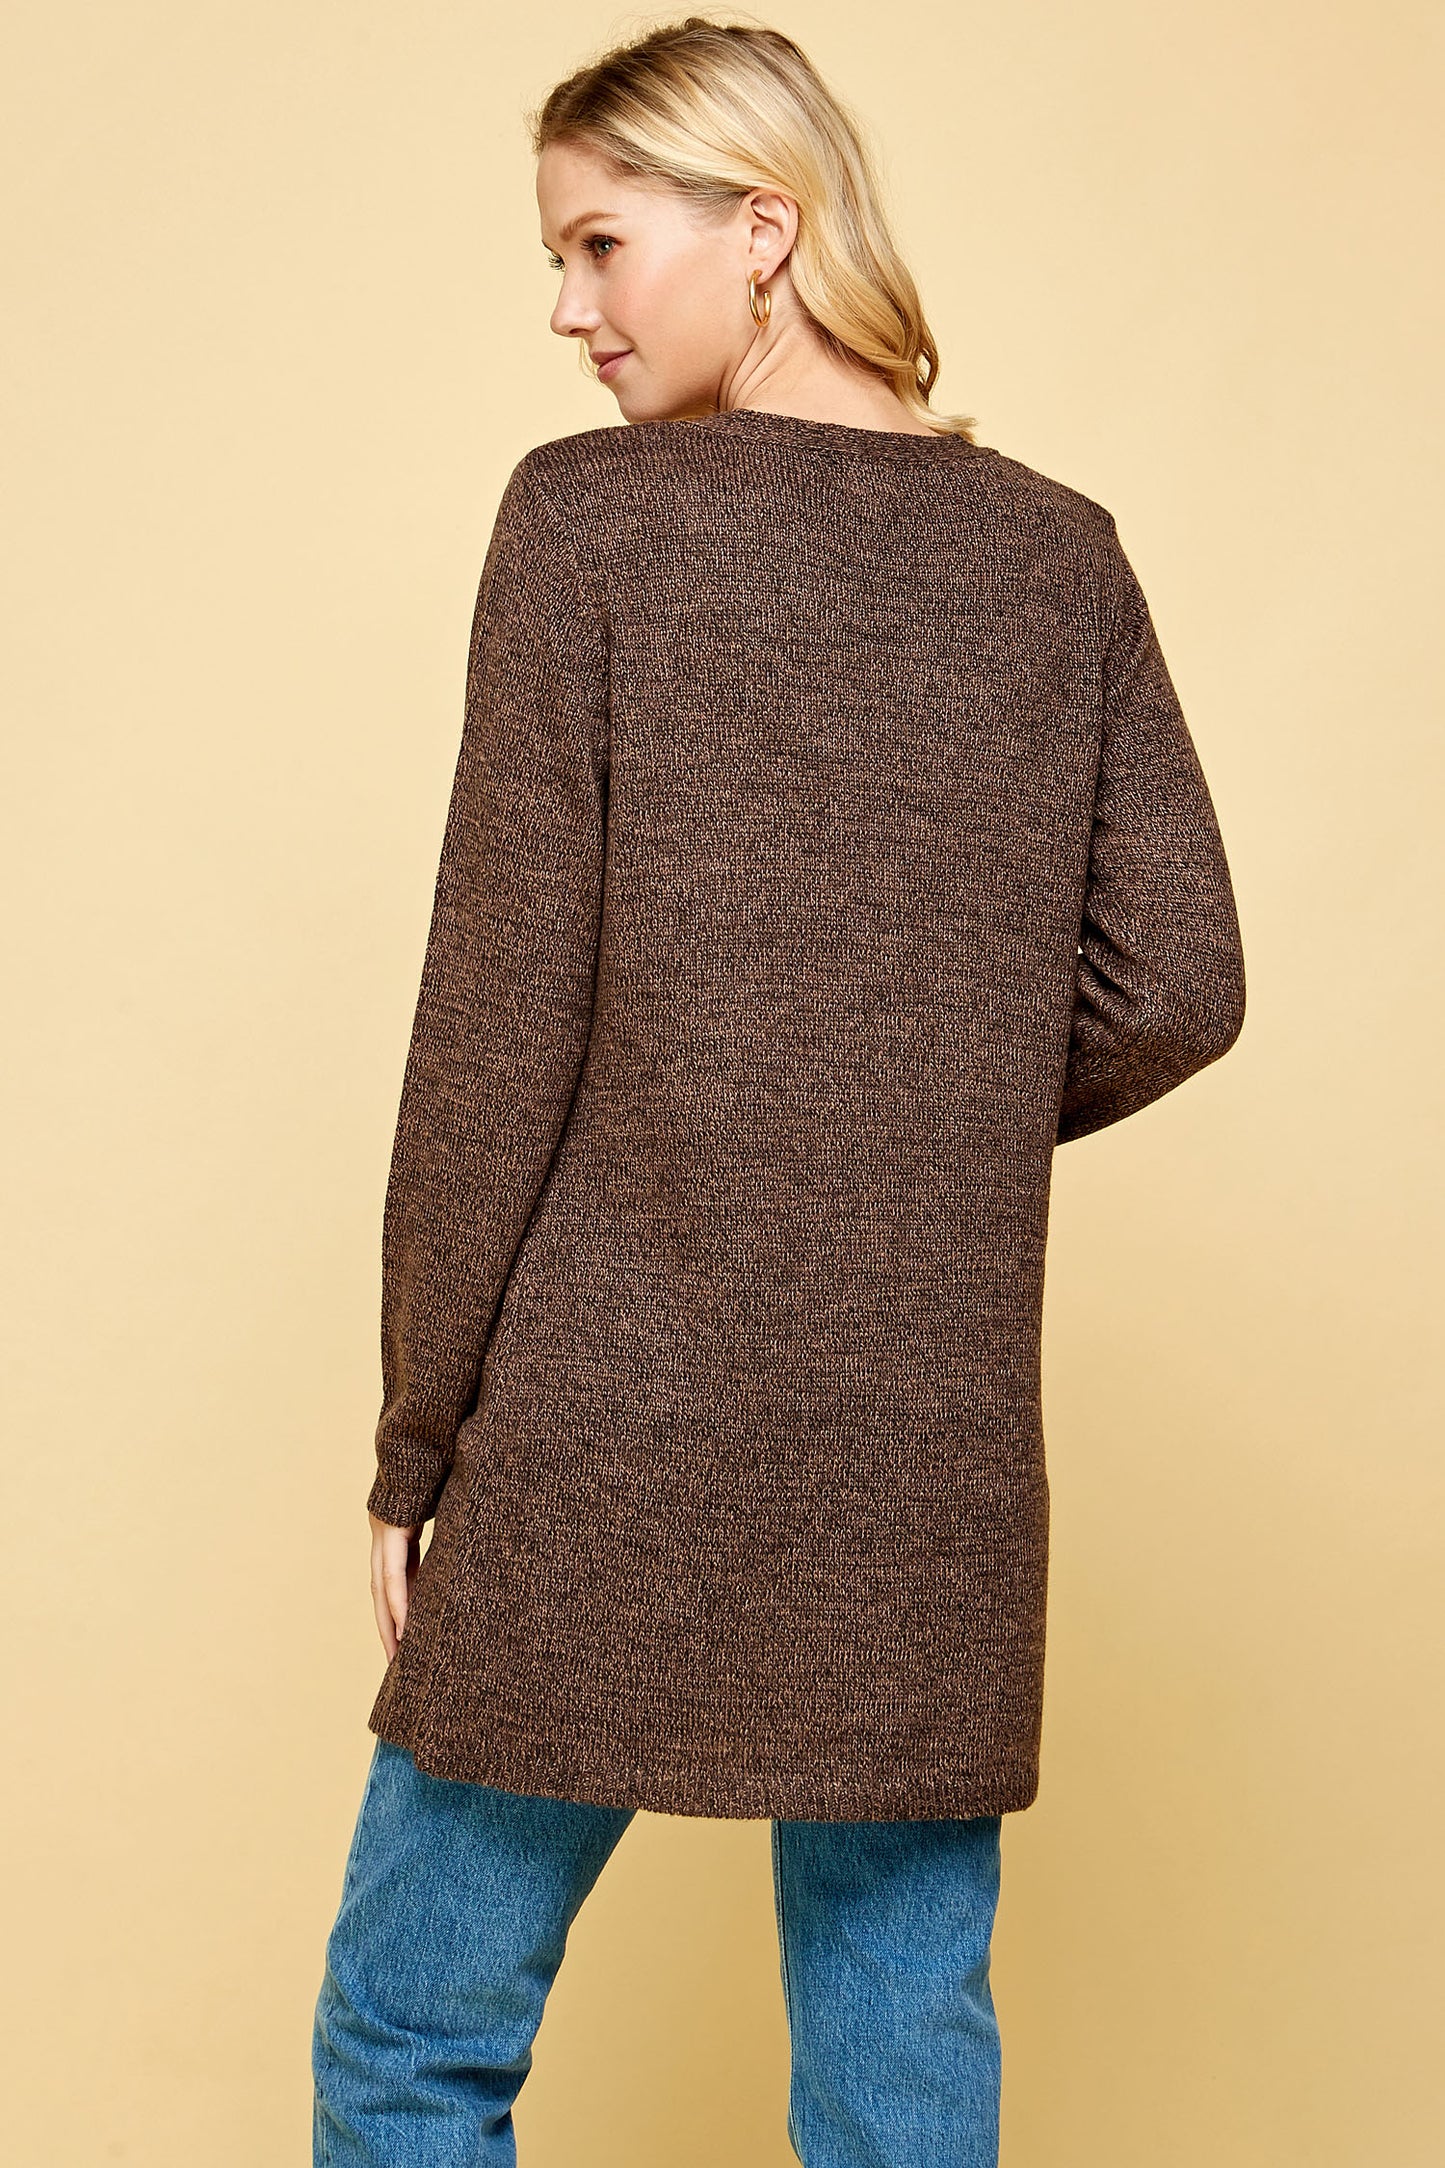 BUTTON FRONT V-NECK KNIT CARDIGAN IN BROWN